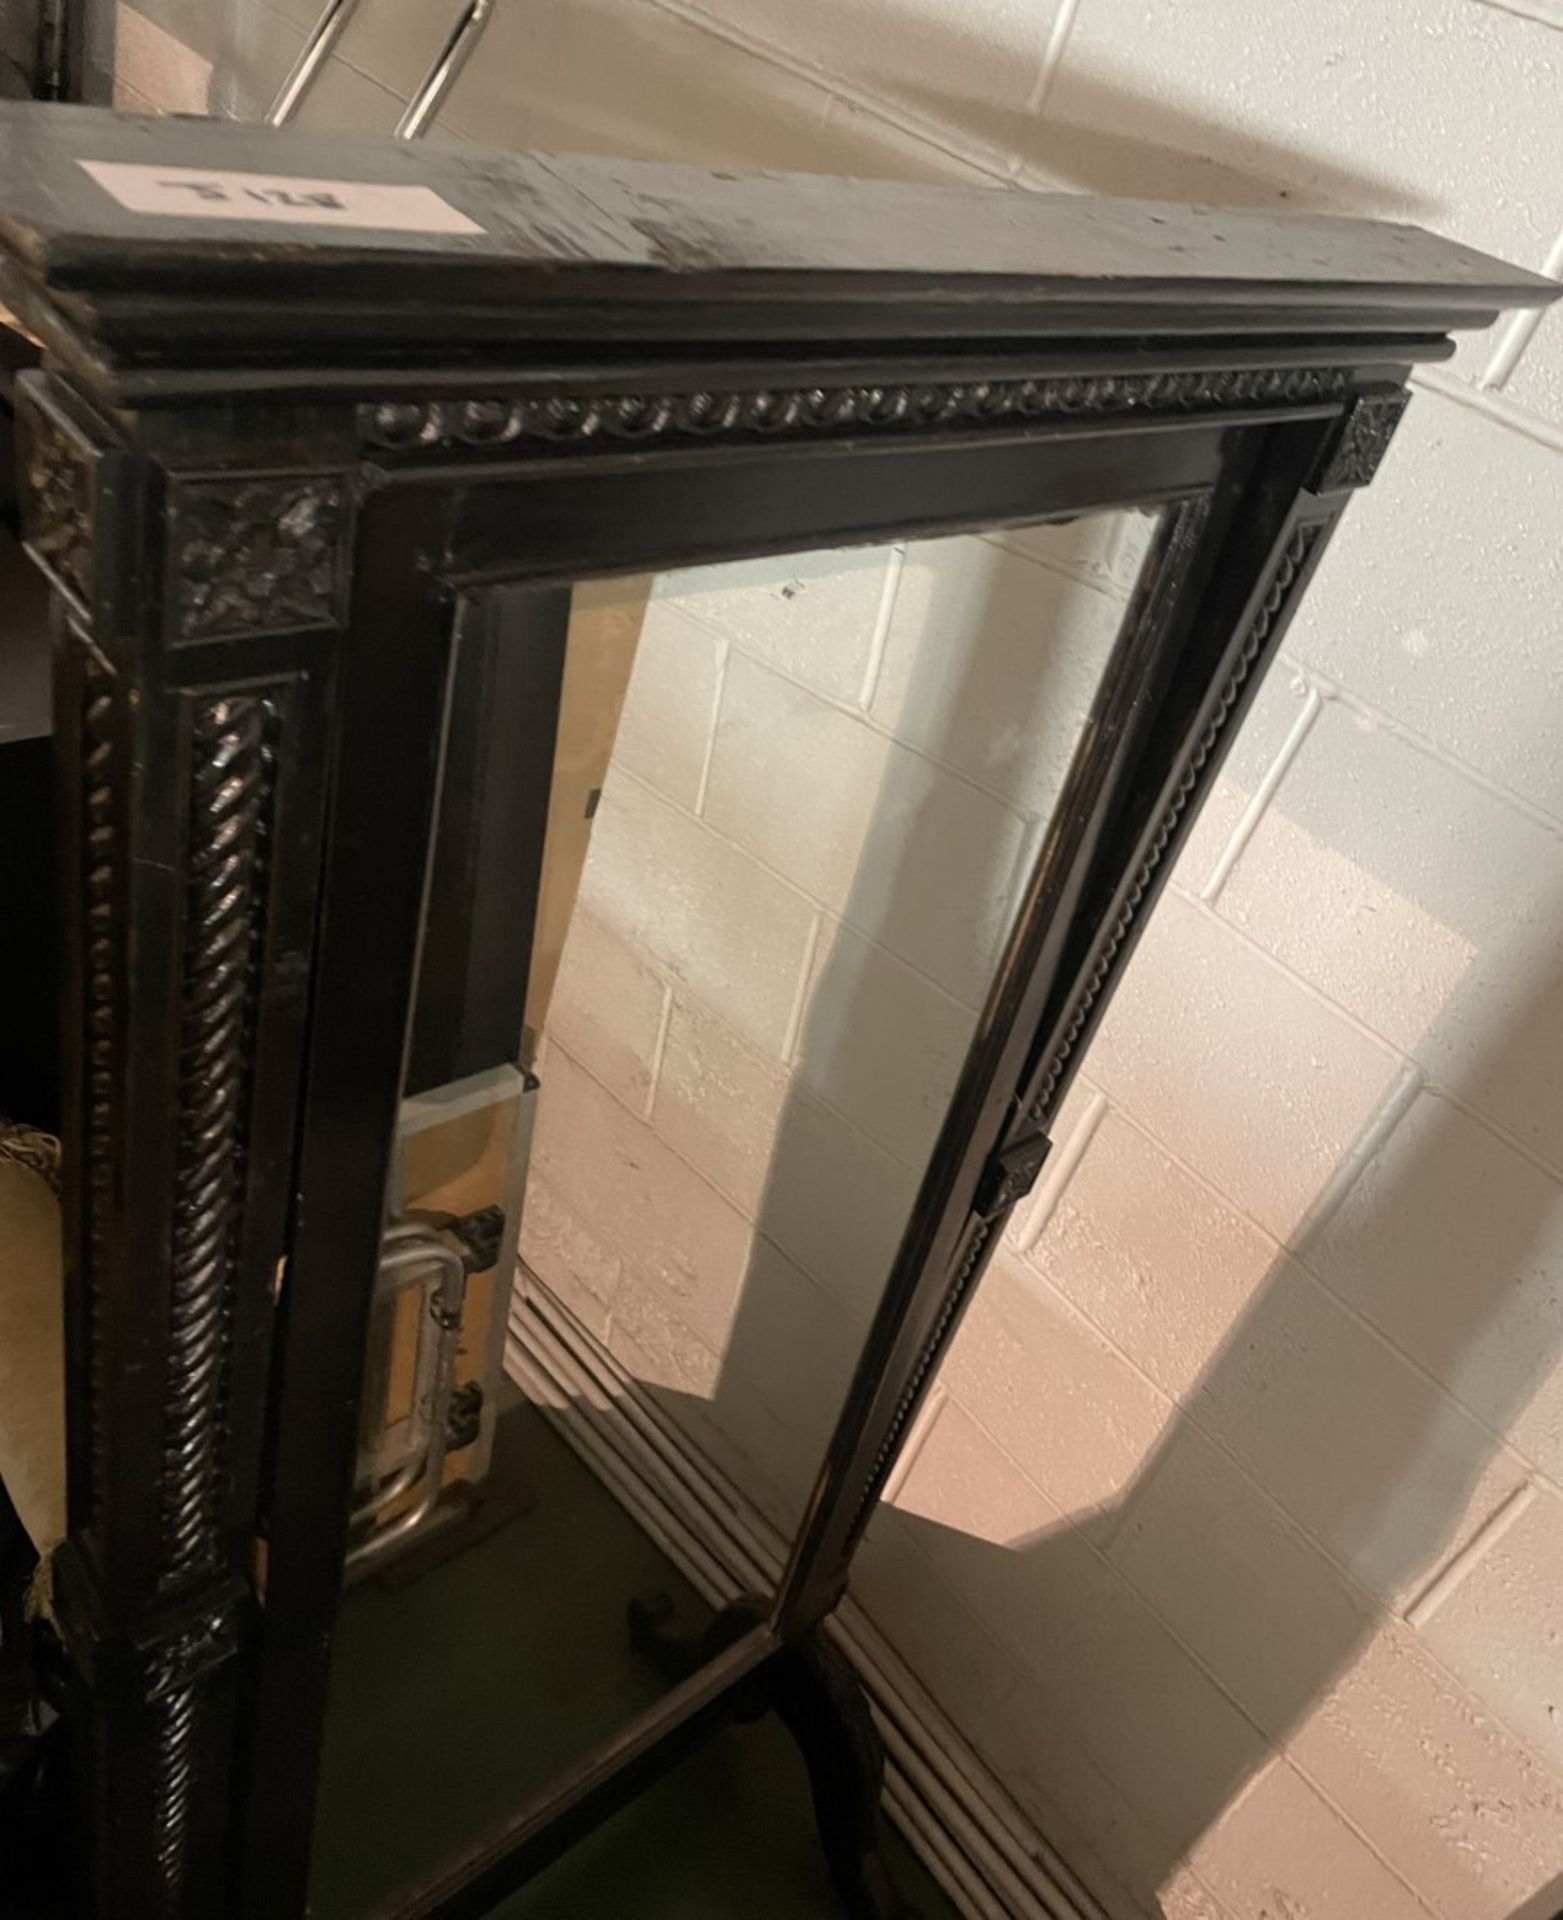 1 x Large Old Jacobean Style Floor Standing Black Mirror With Wonderful Detail - Approx 85x168Cm - - Image 2 of 14